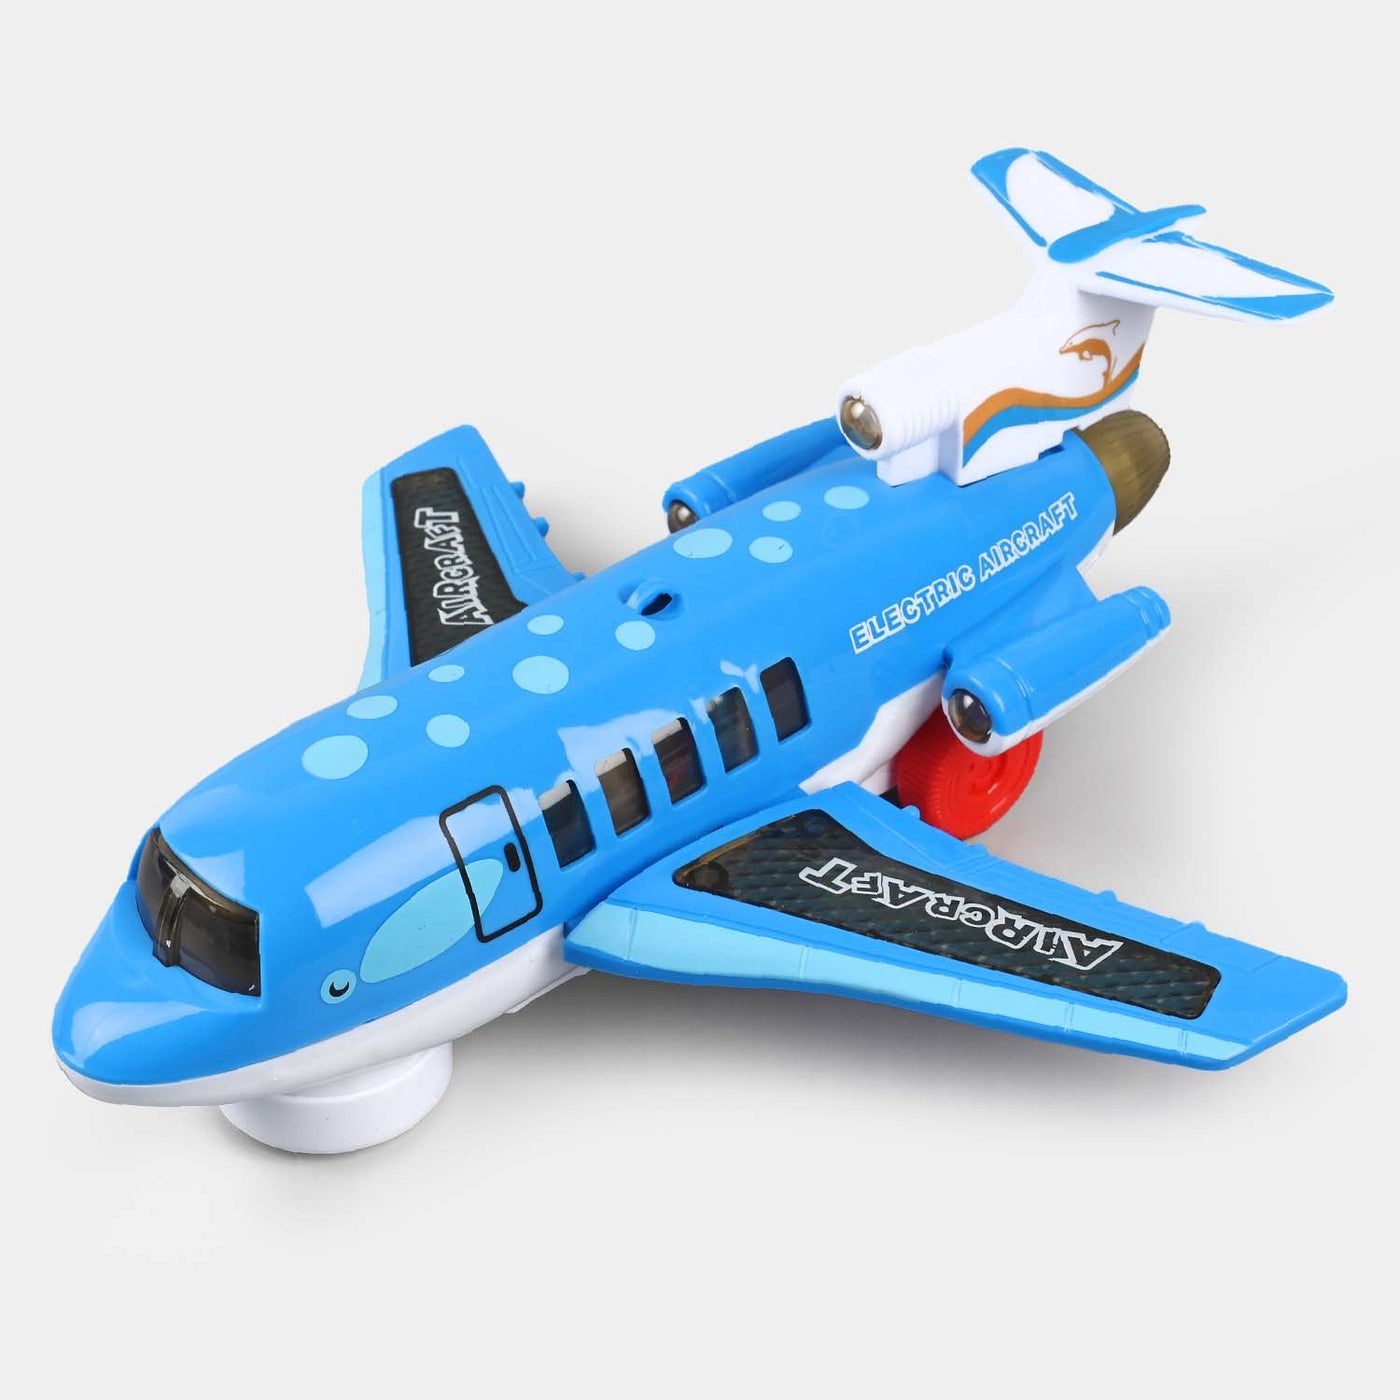 ELECTRIC AIRCRAFT WITH LIGHT & MUSIC FOR KIDS